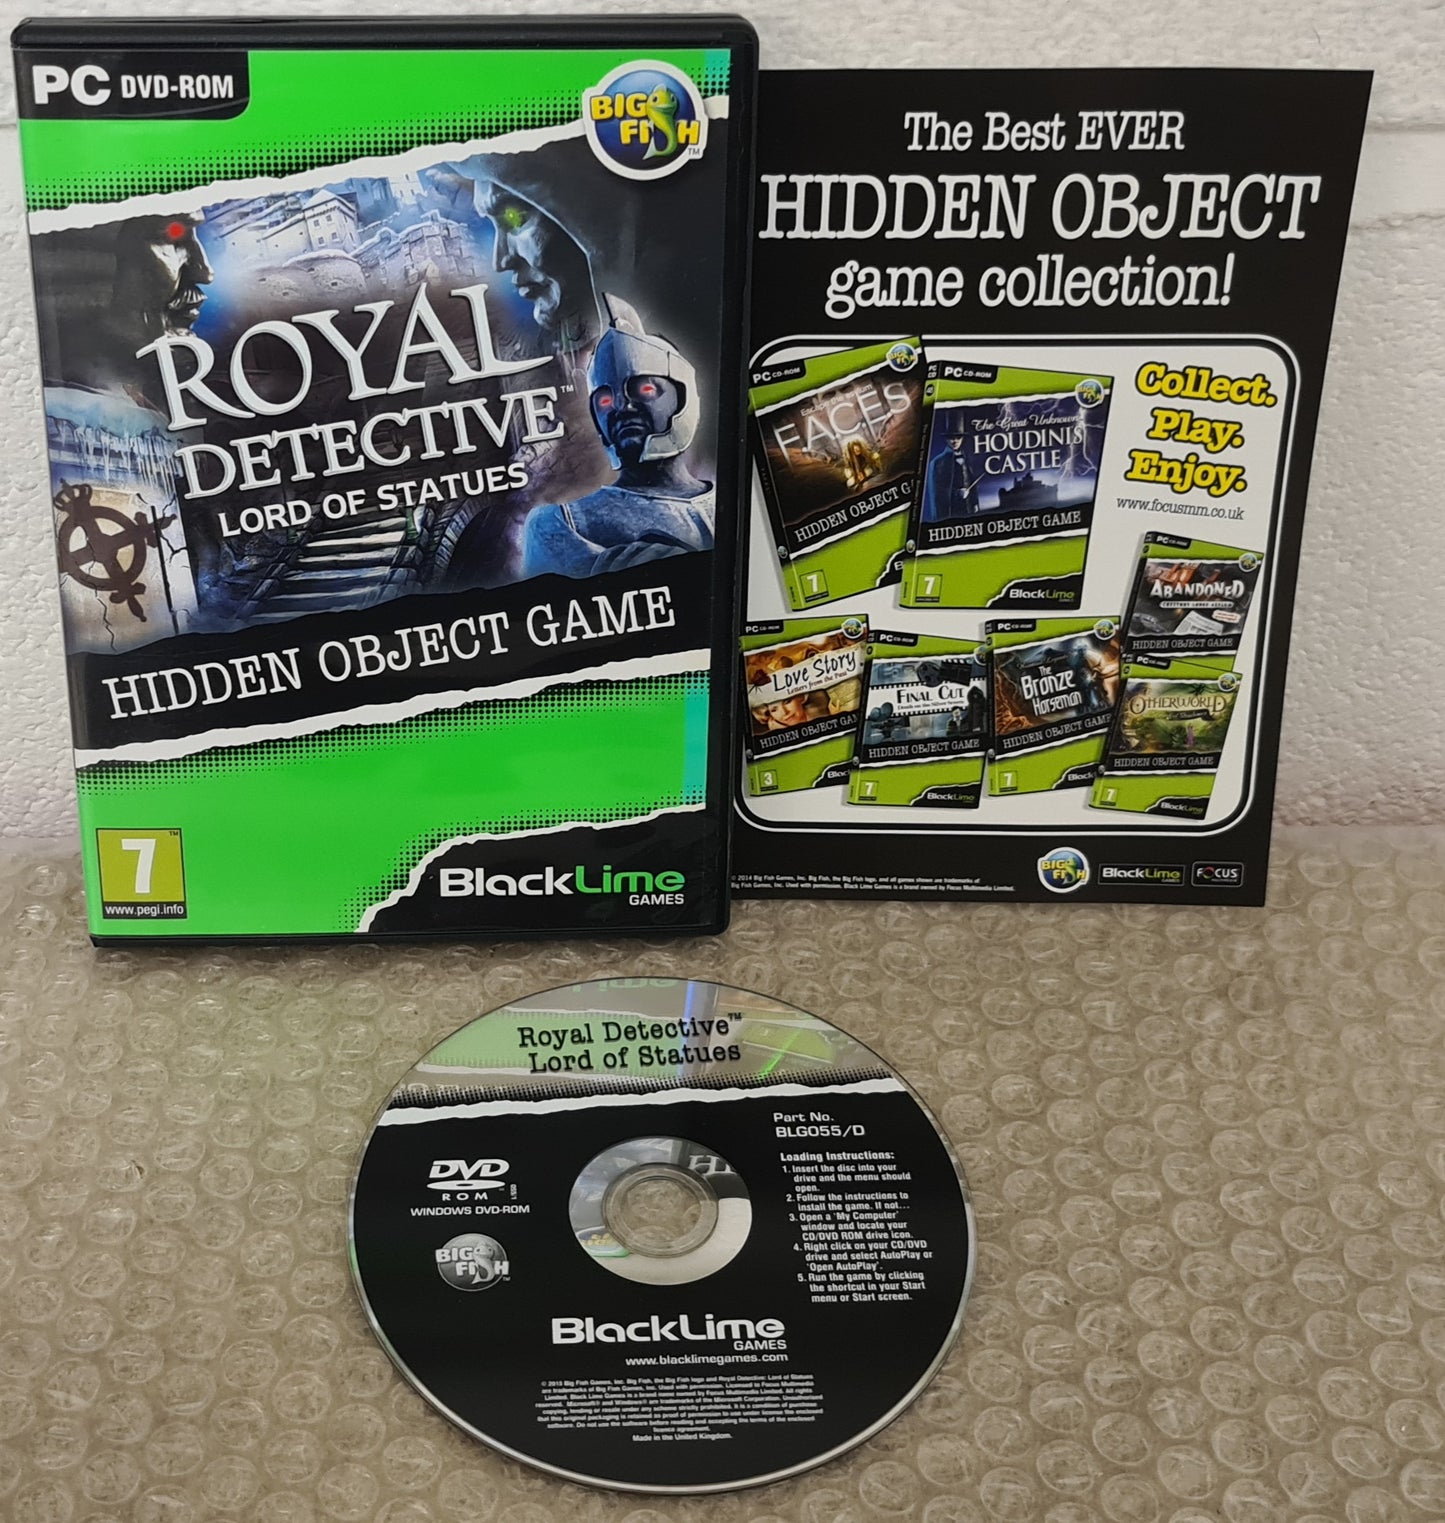 Royal Detective Lord of Statues PC Game